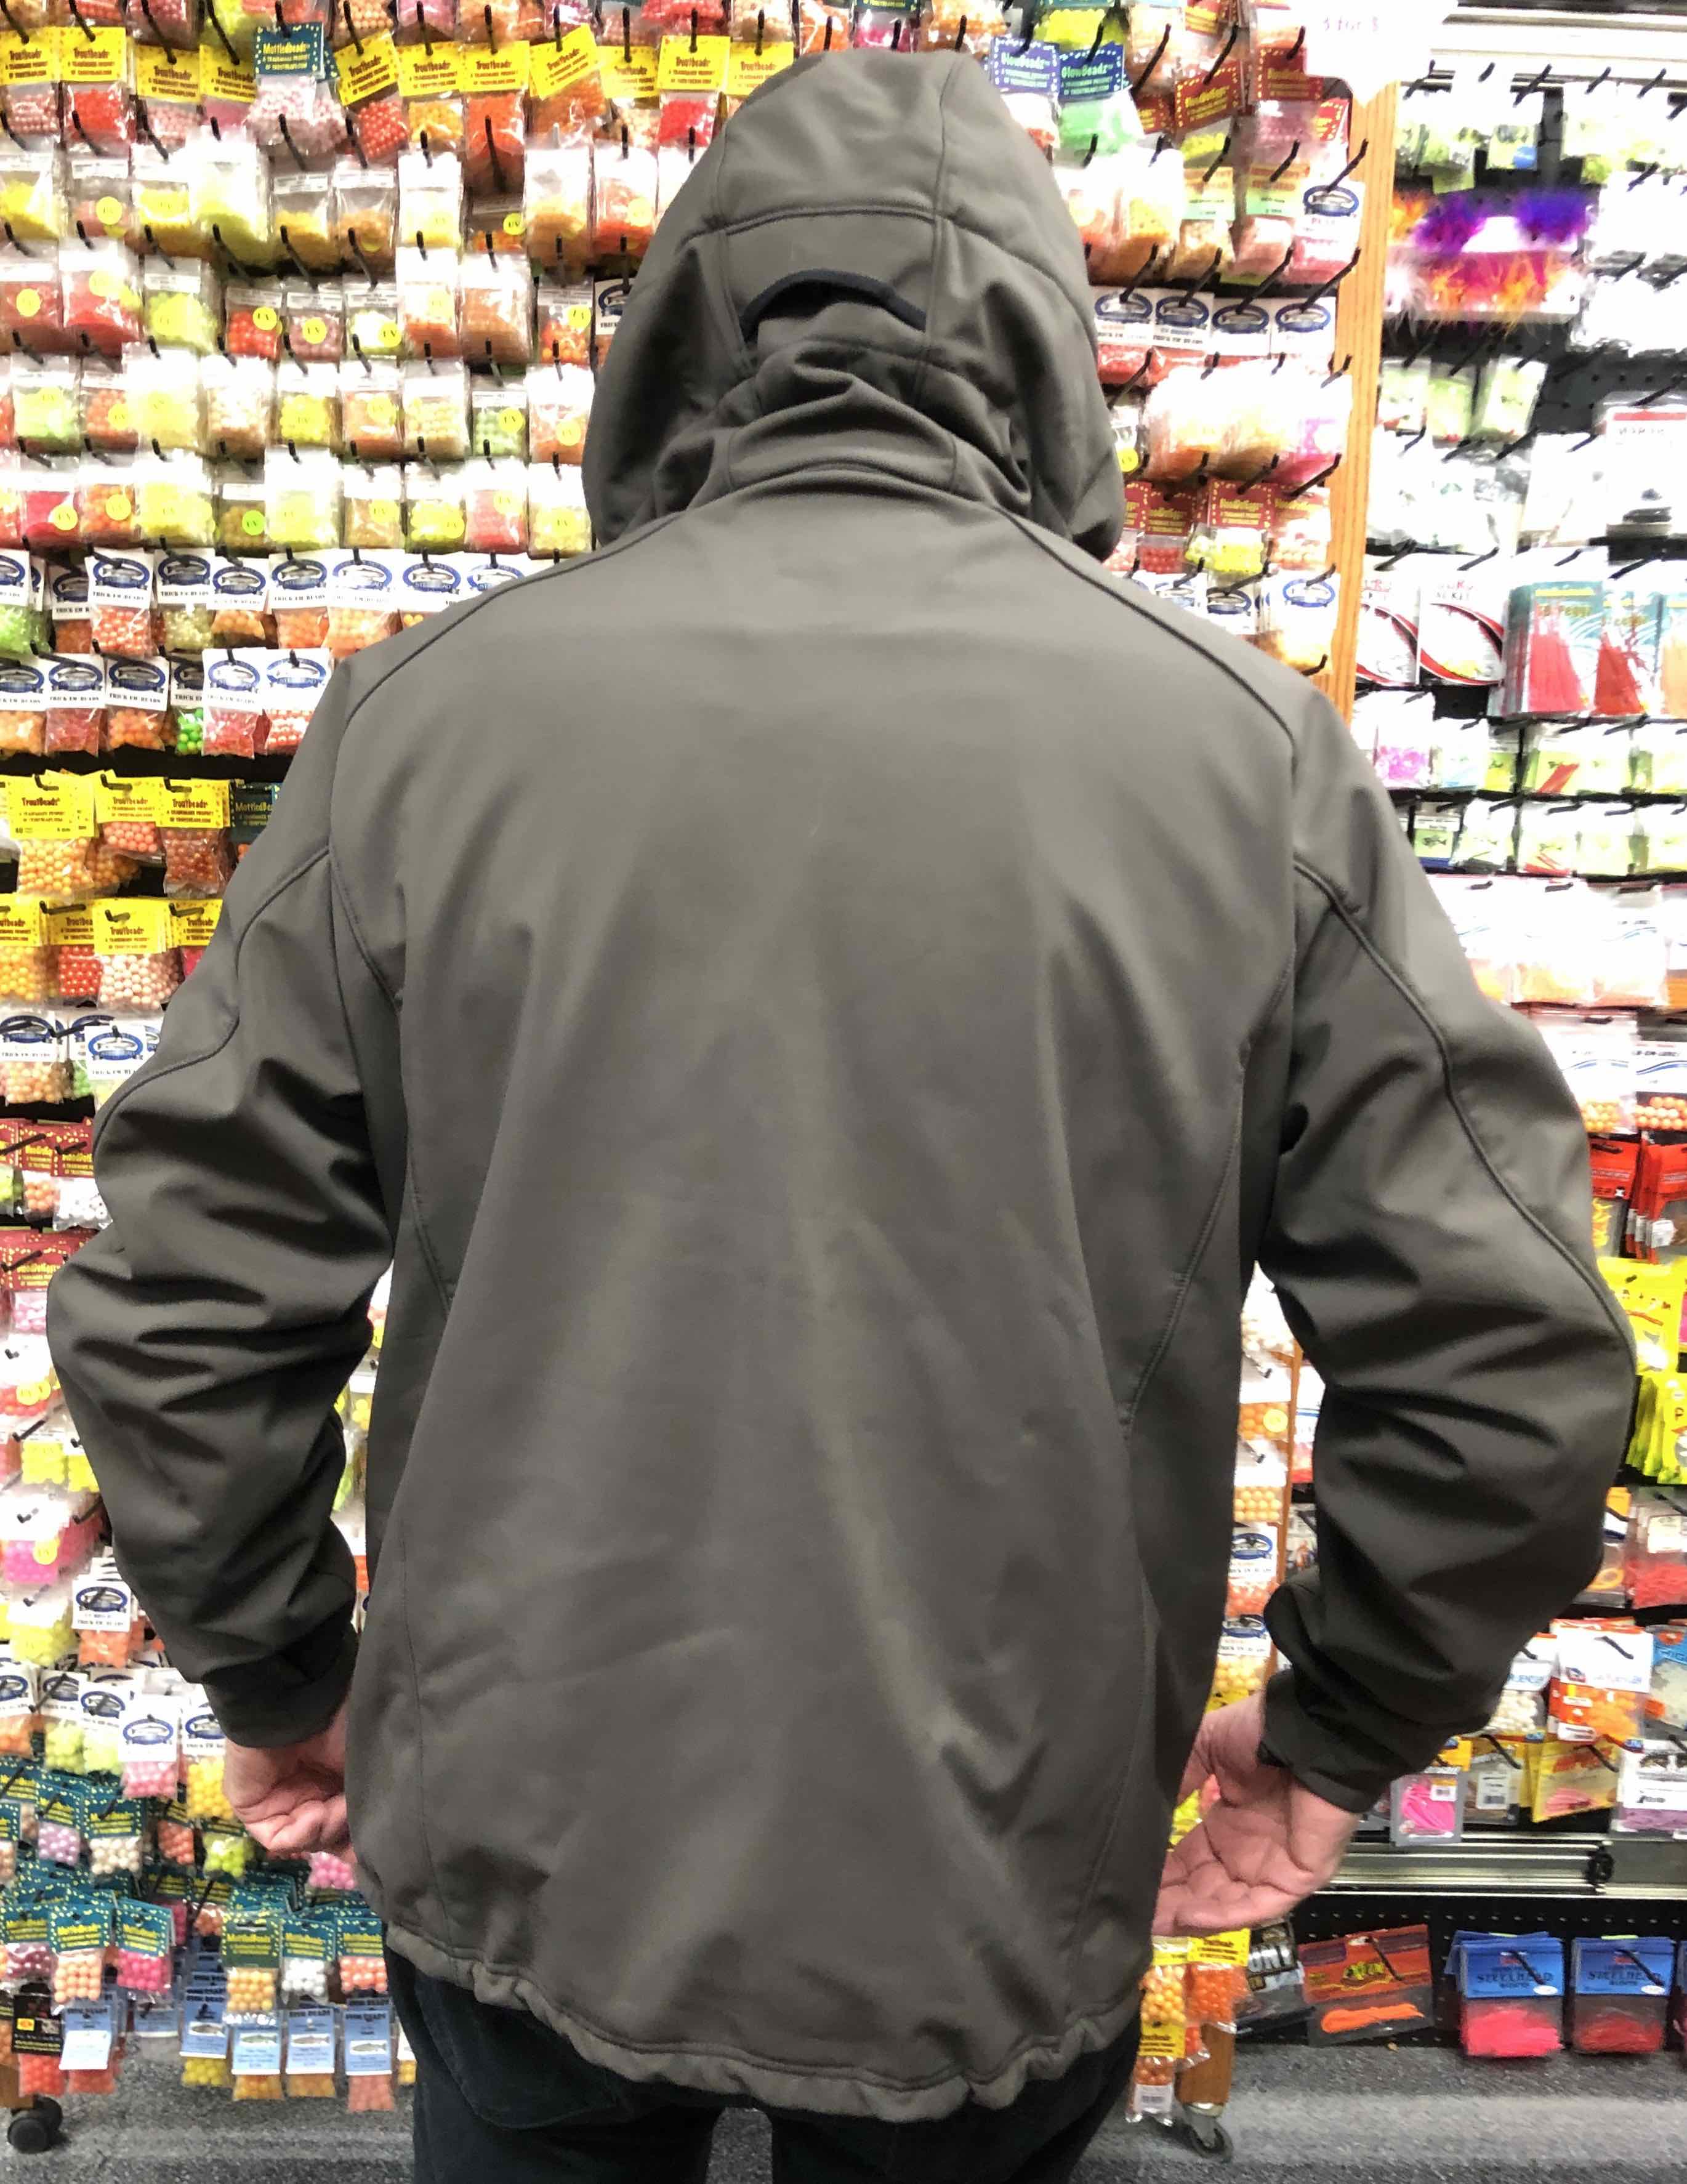 Simms WindStopper Windproof Breathable Jacket - Size XL - LIKE NEW! - $75